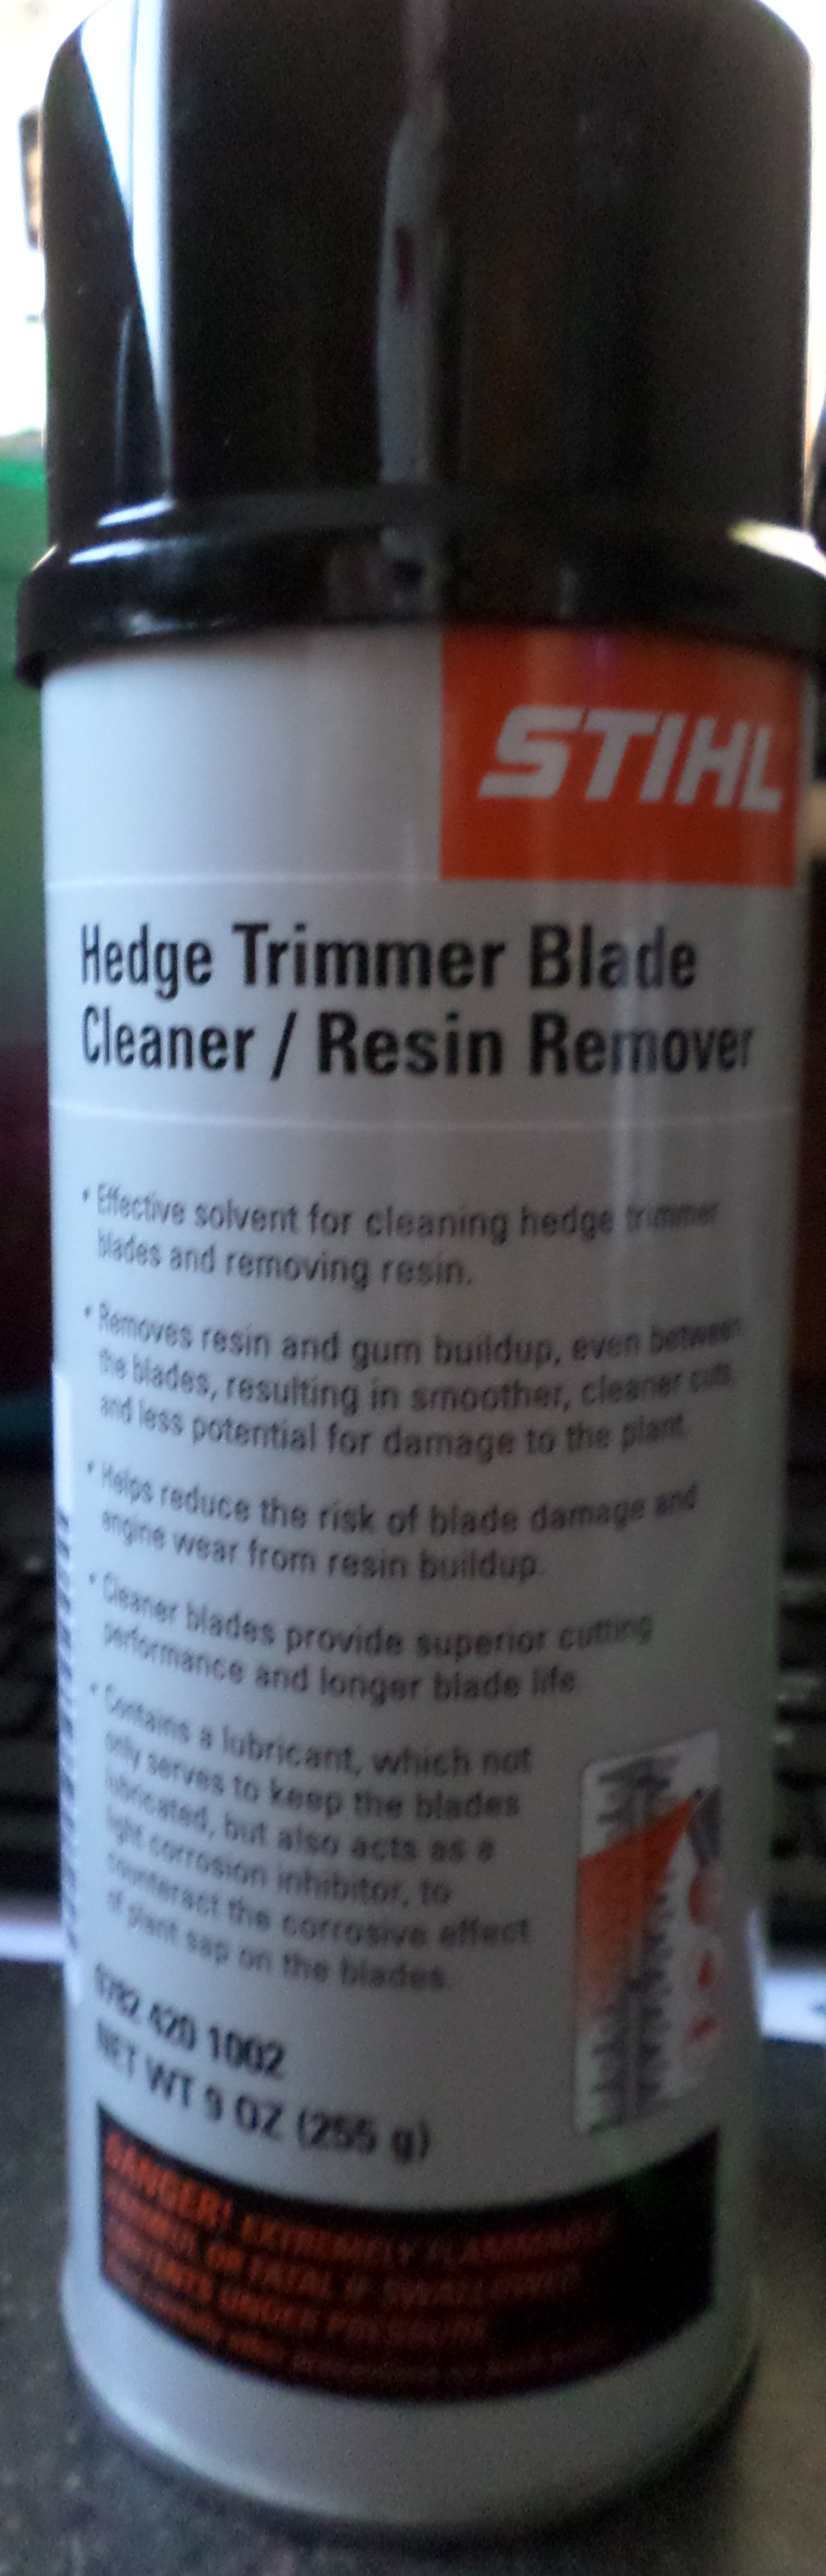 Stihl Hedge Trimmer Blade Cleaner/Resin Remover - concord garden